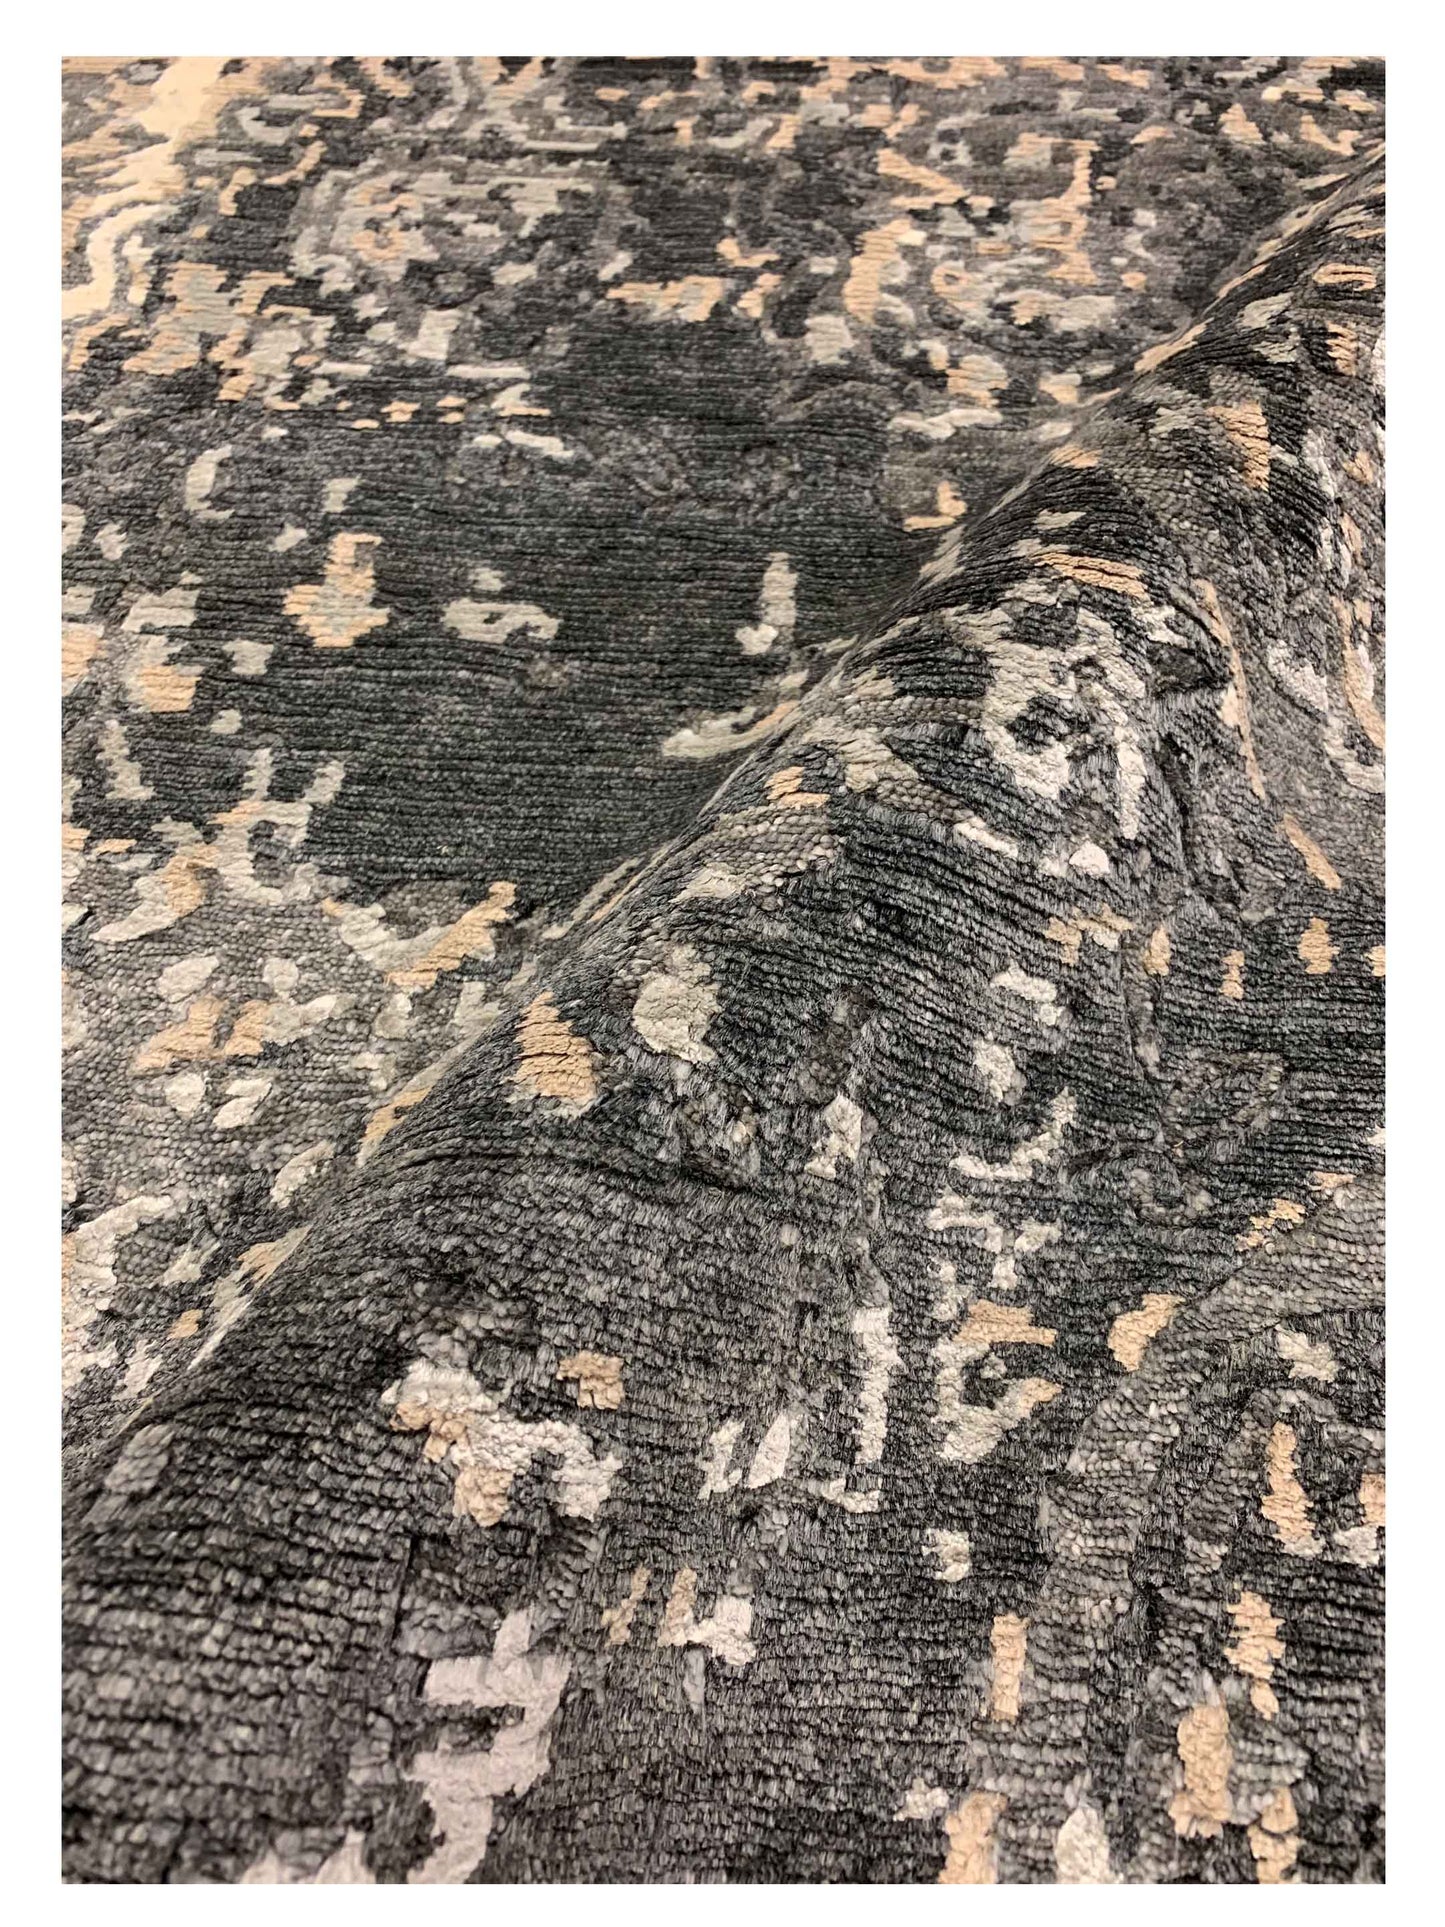 Artisan Mary  Dk.Grey  Contemporary Knotted Rug